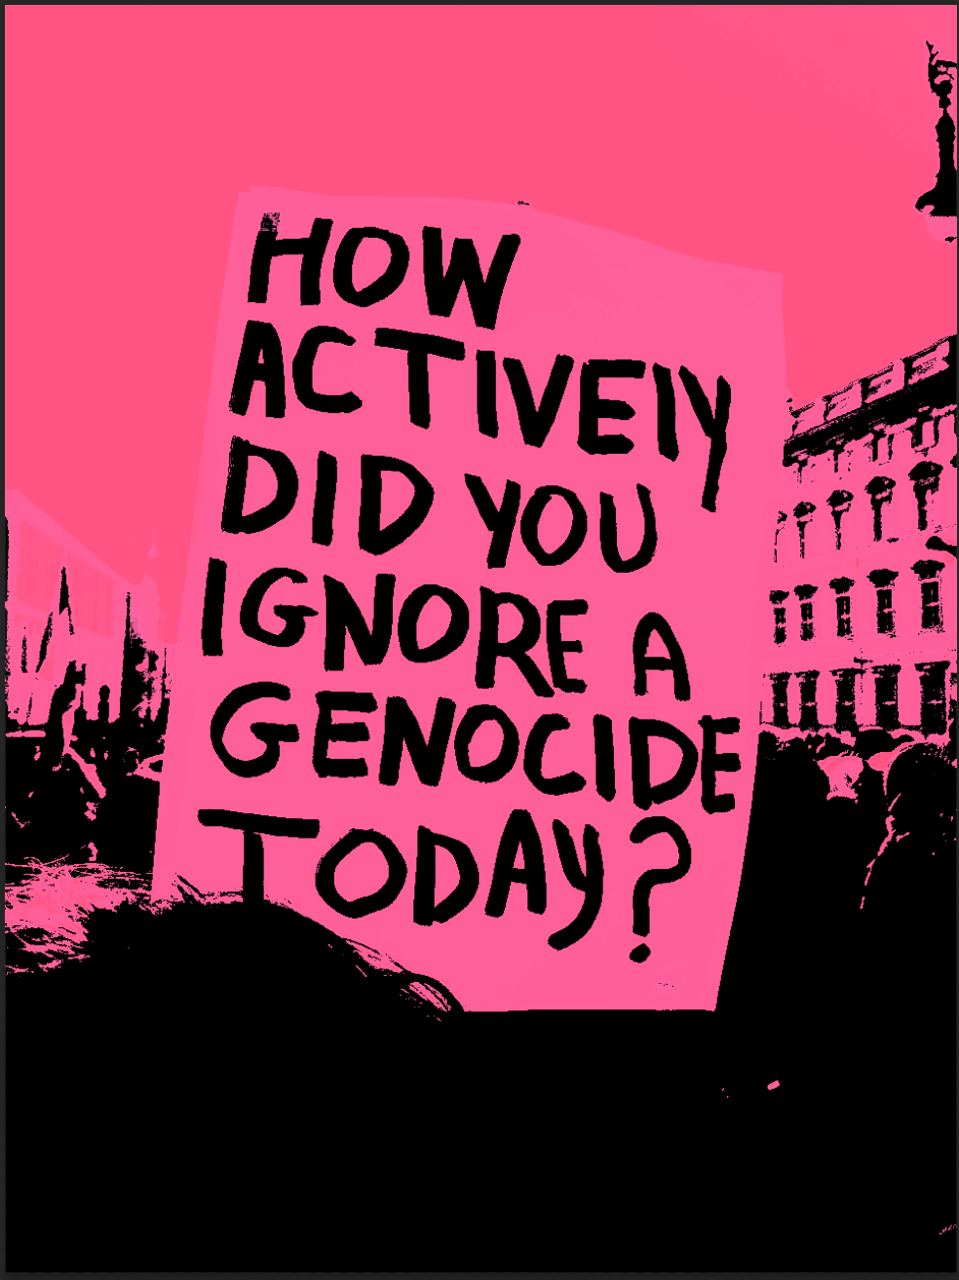 Duotone image edited to shocking pink and black, of a banner held up over the heads of a protesting crowd as it passes the Humboldt Forum in Berlin. The banner is painted with thick lines of handwritten text which read: “How actively did you ignore a genocide today?”